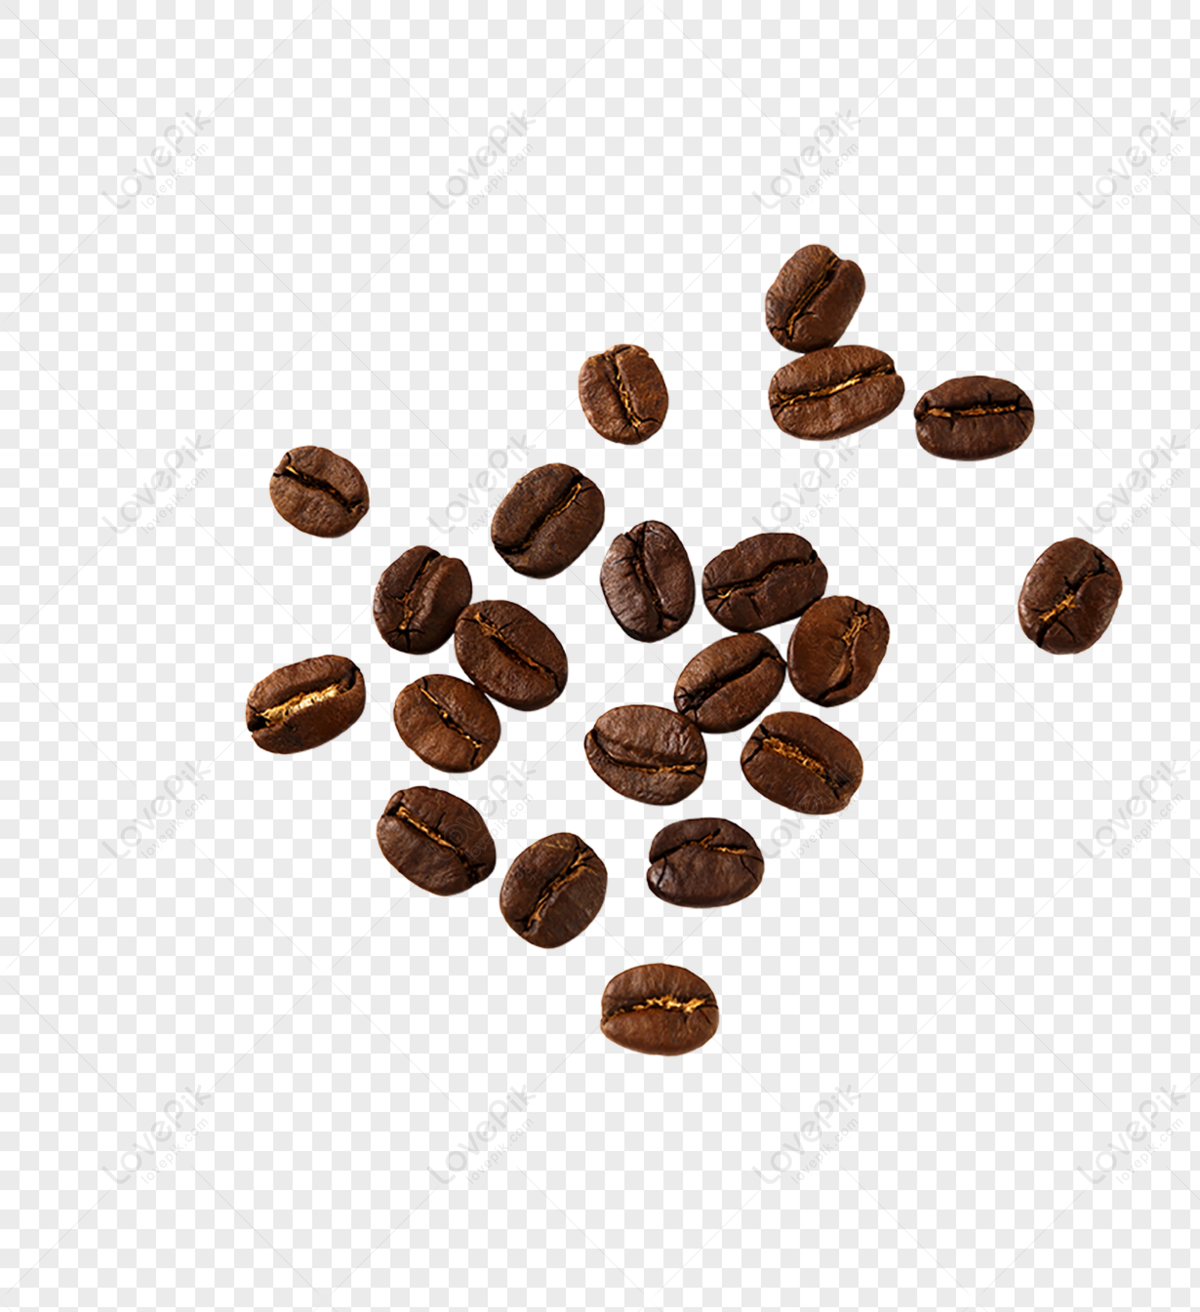 A Few Coffee Beans In The White Background Free PNG And Clipart Image For  Free Download - Lovepik | 400334139